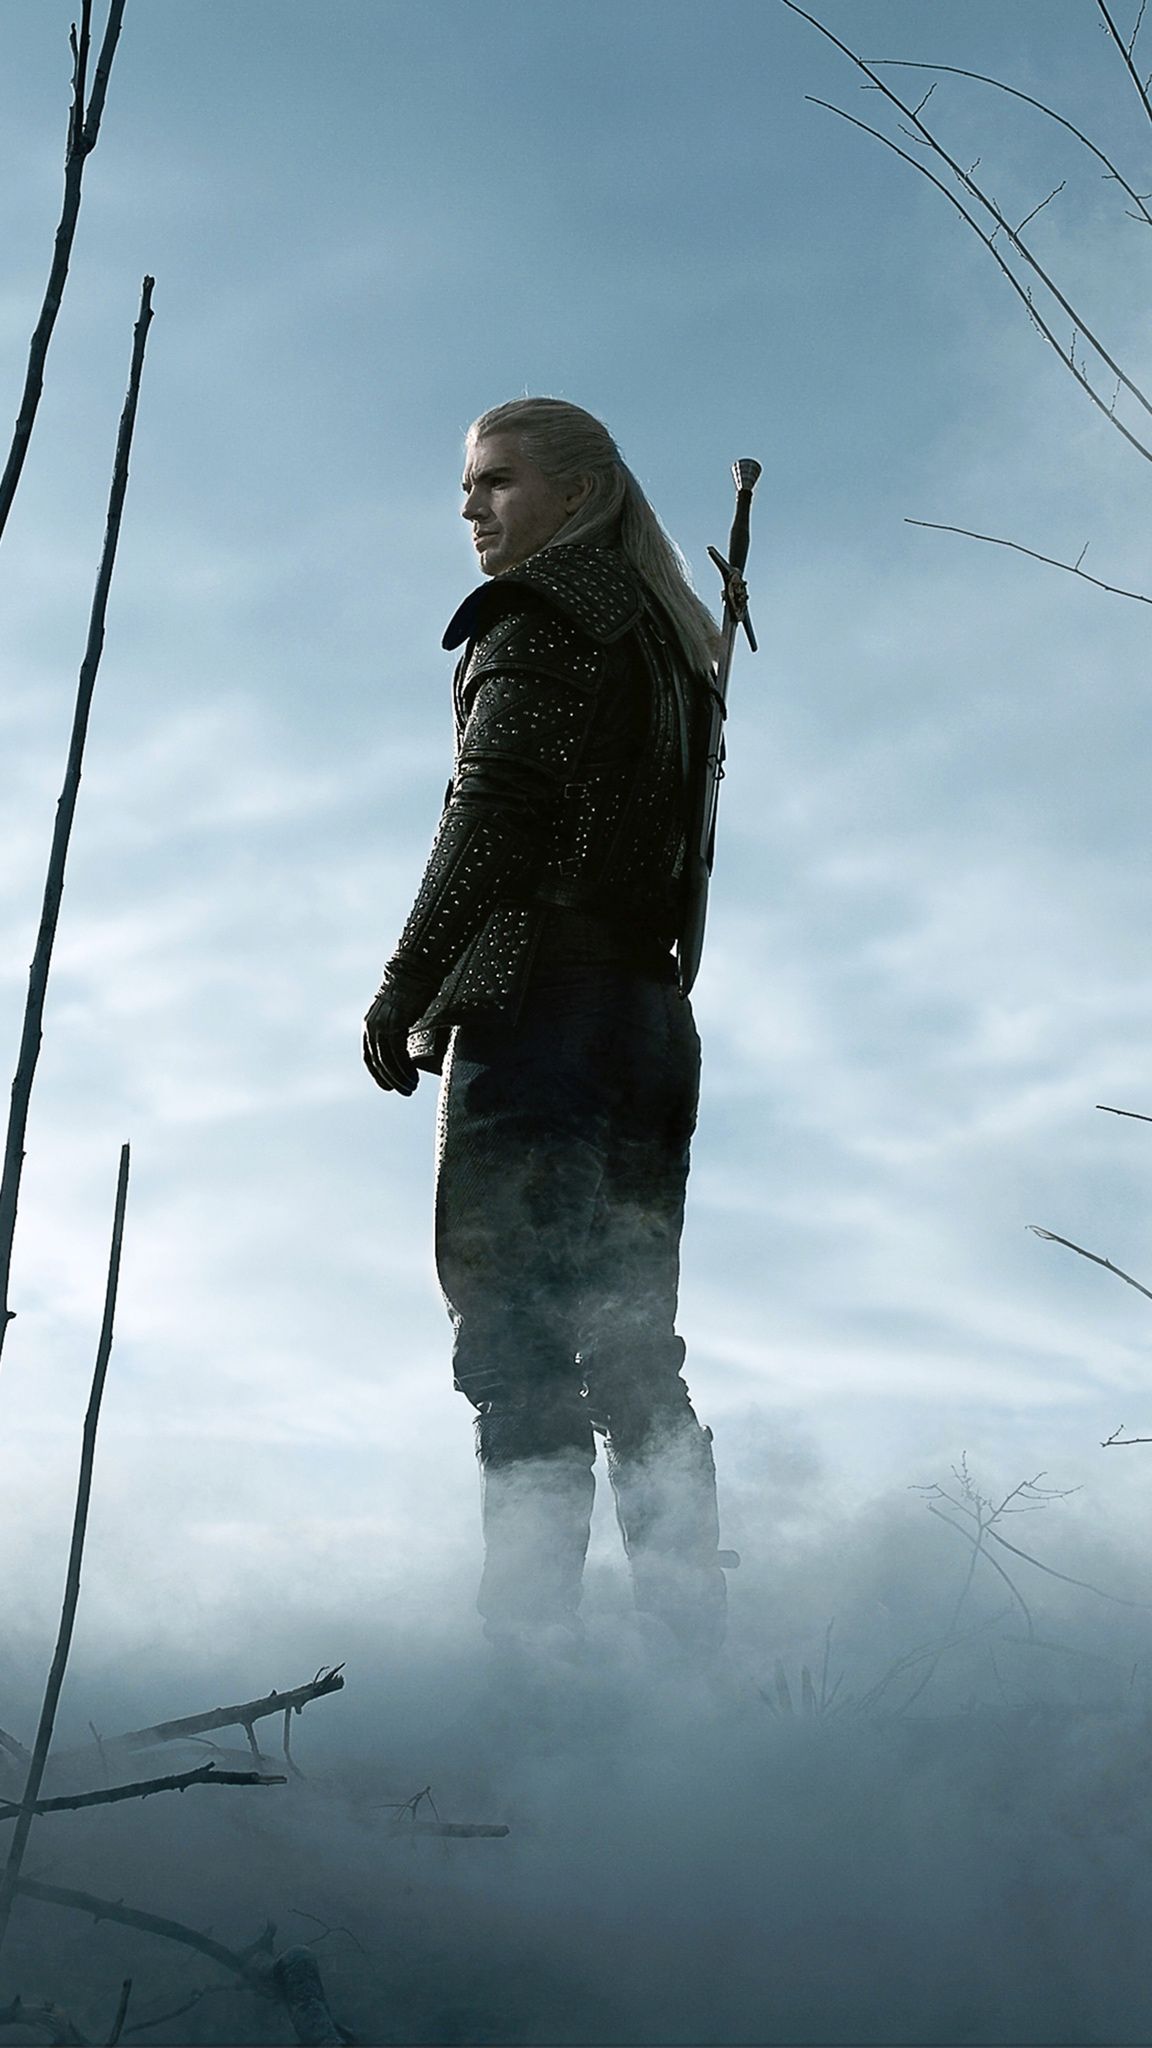 The Witcher wallpaper for iPhone pack